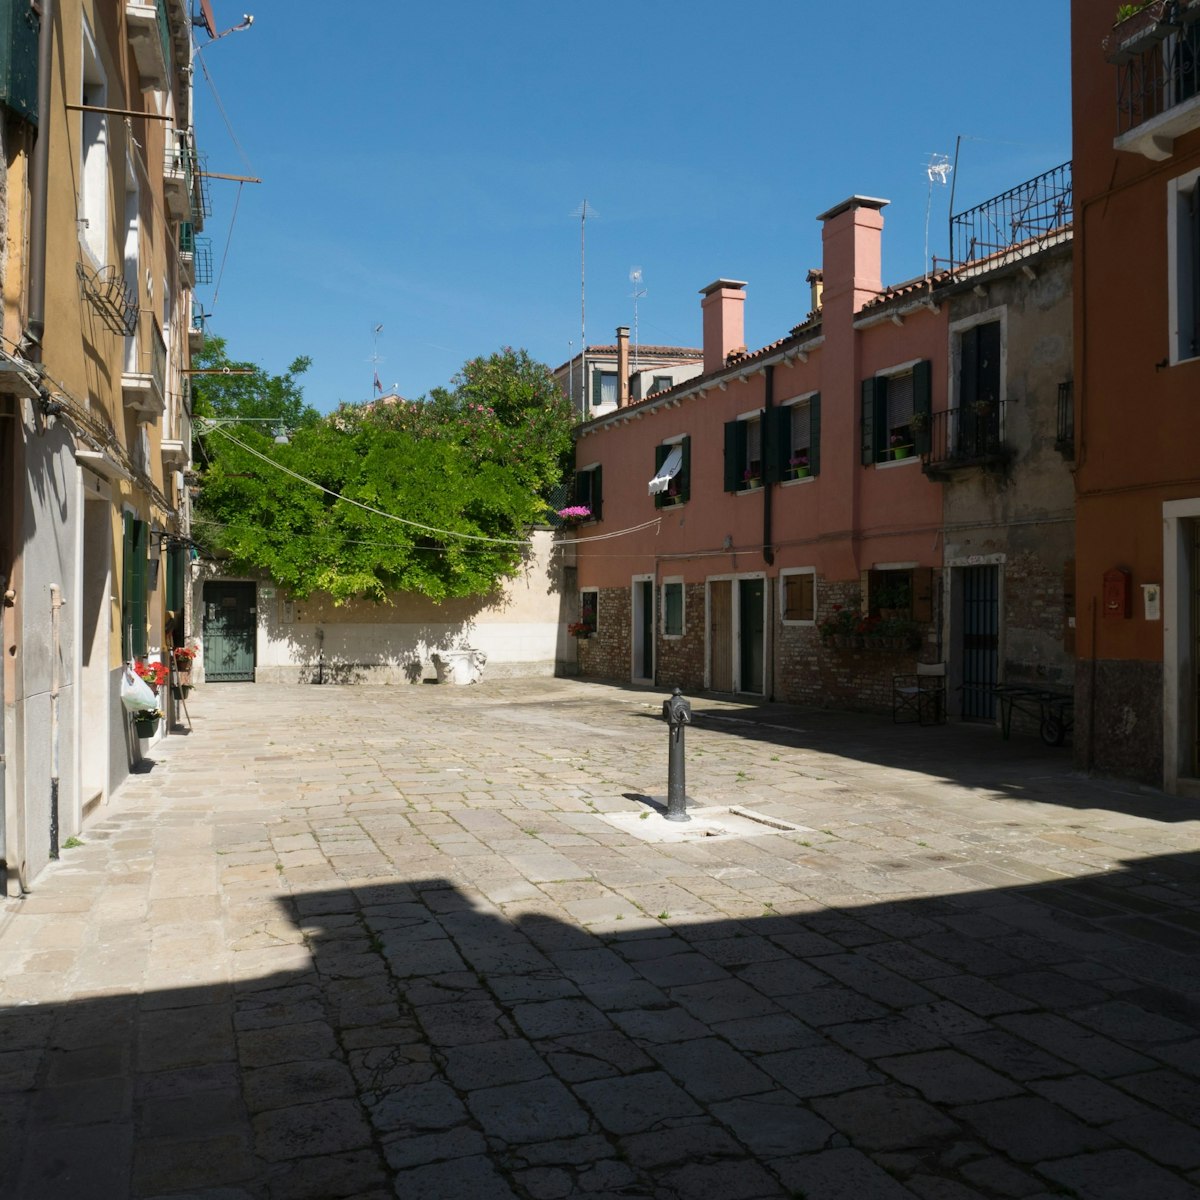 The picturesque Corte Bianco is home to Loncanda Sant'Anna